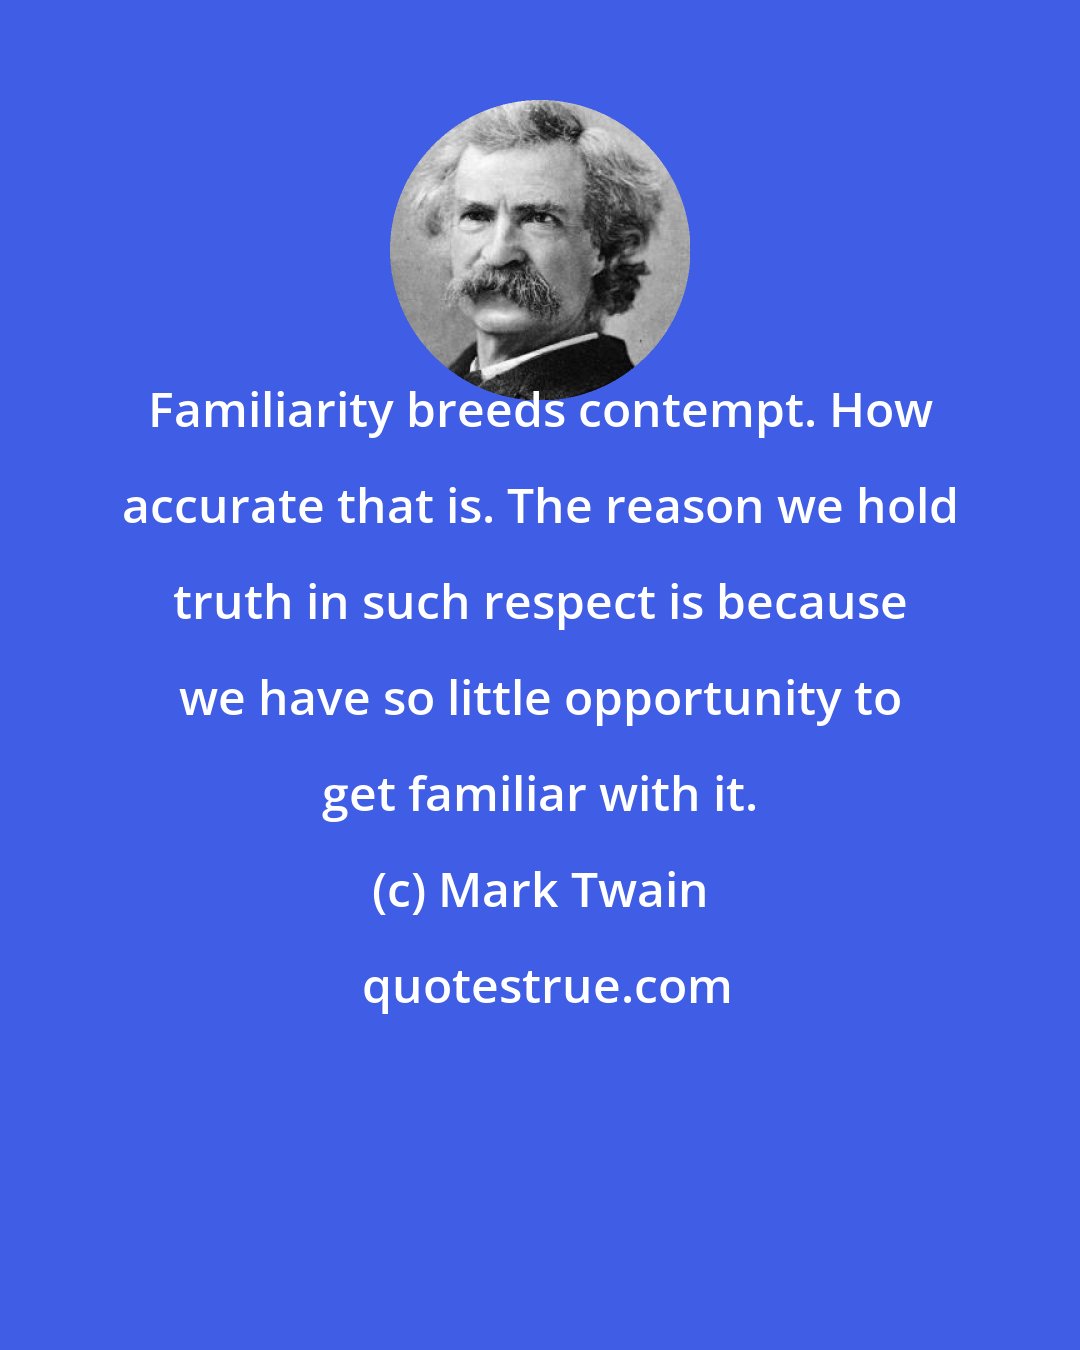 Mark Twain: Familiarity breeds contempt. How accurate that is. The reason we hold truth in such respect is because we have so little opportunity to get familiar with it.